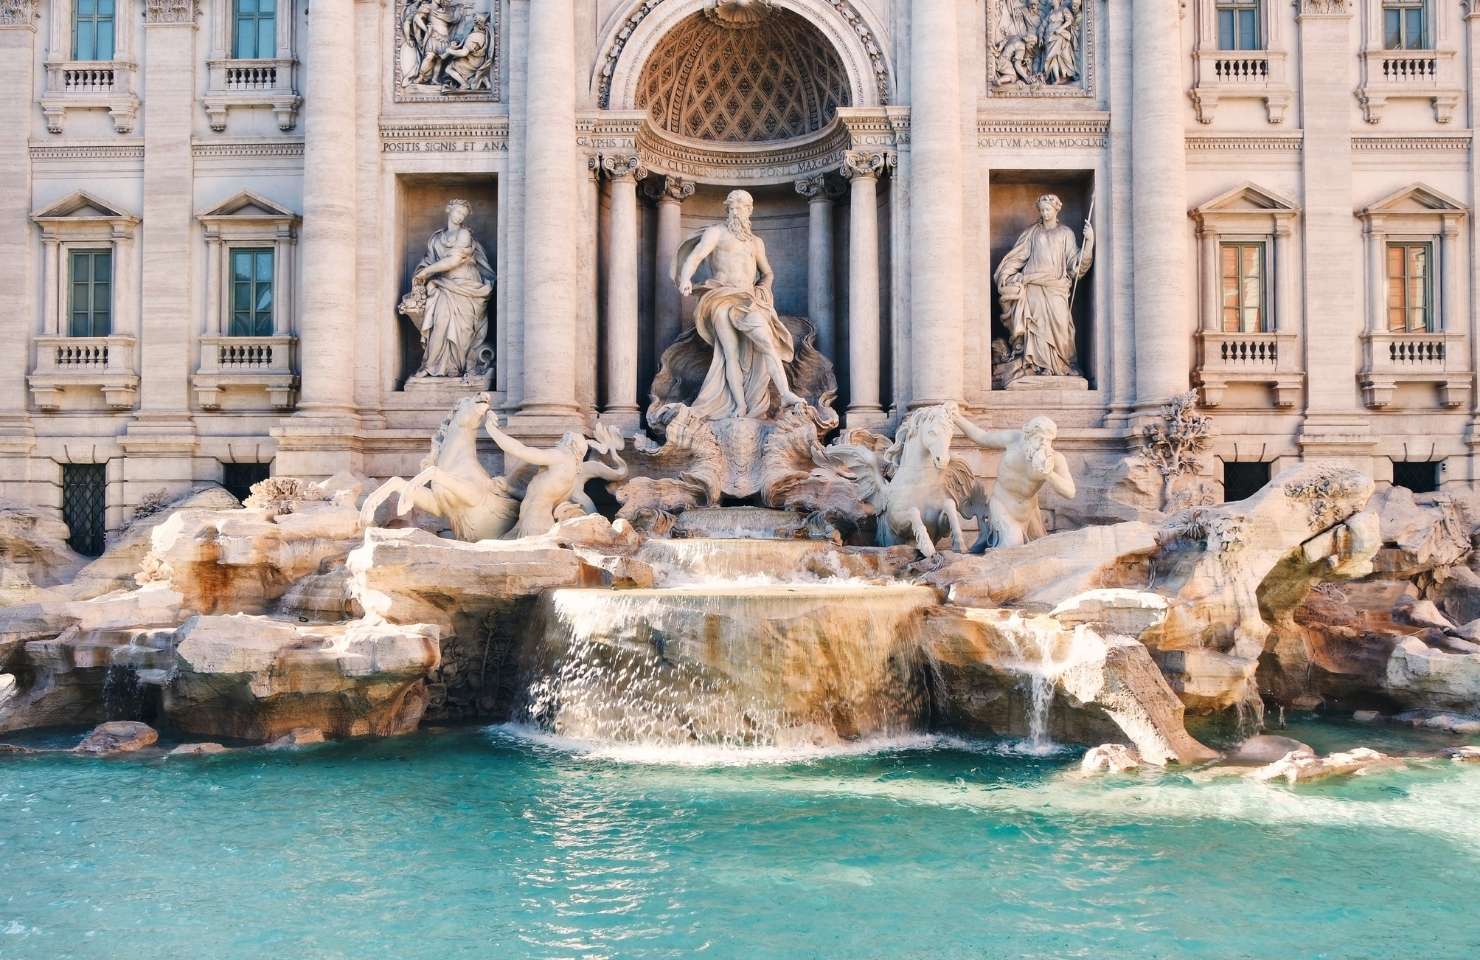 View on the Trevi Fountain